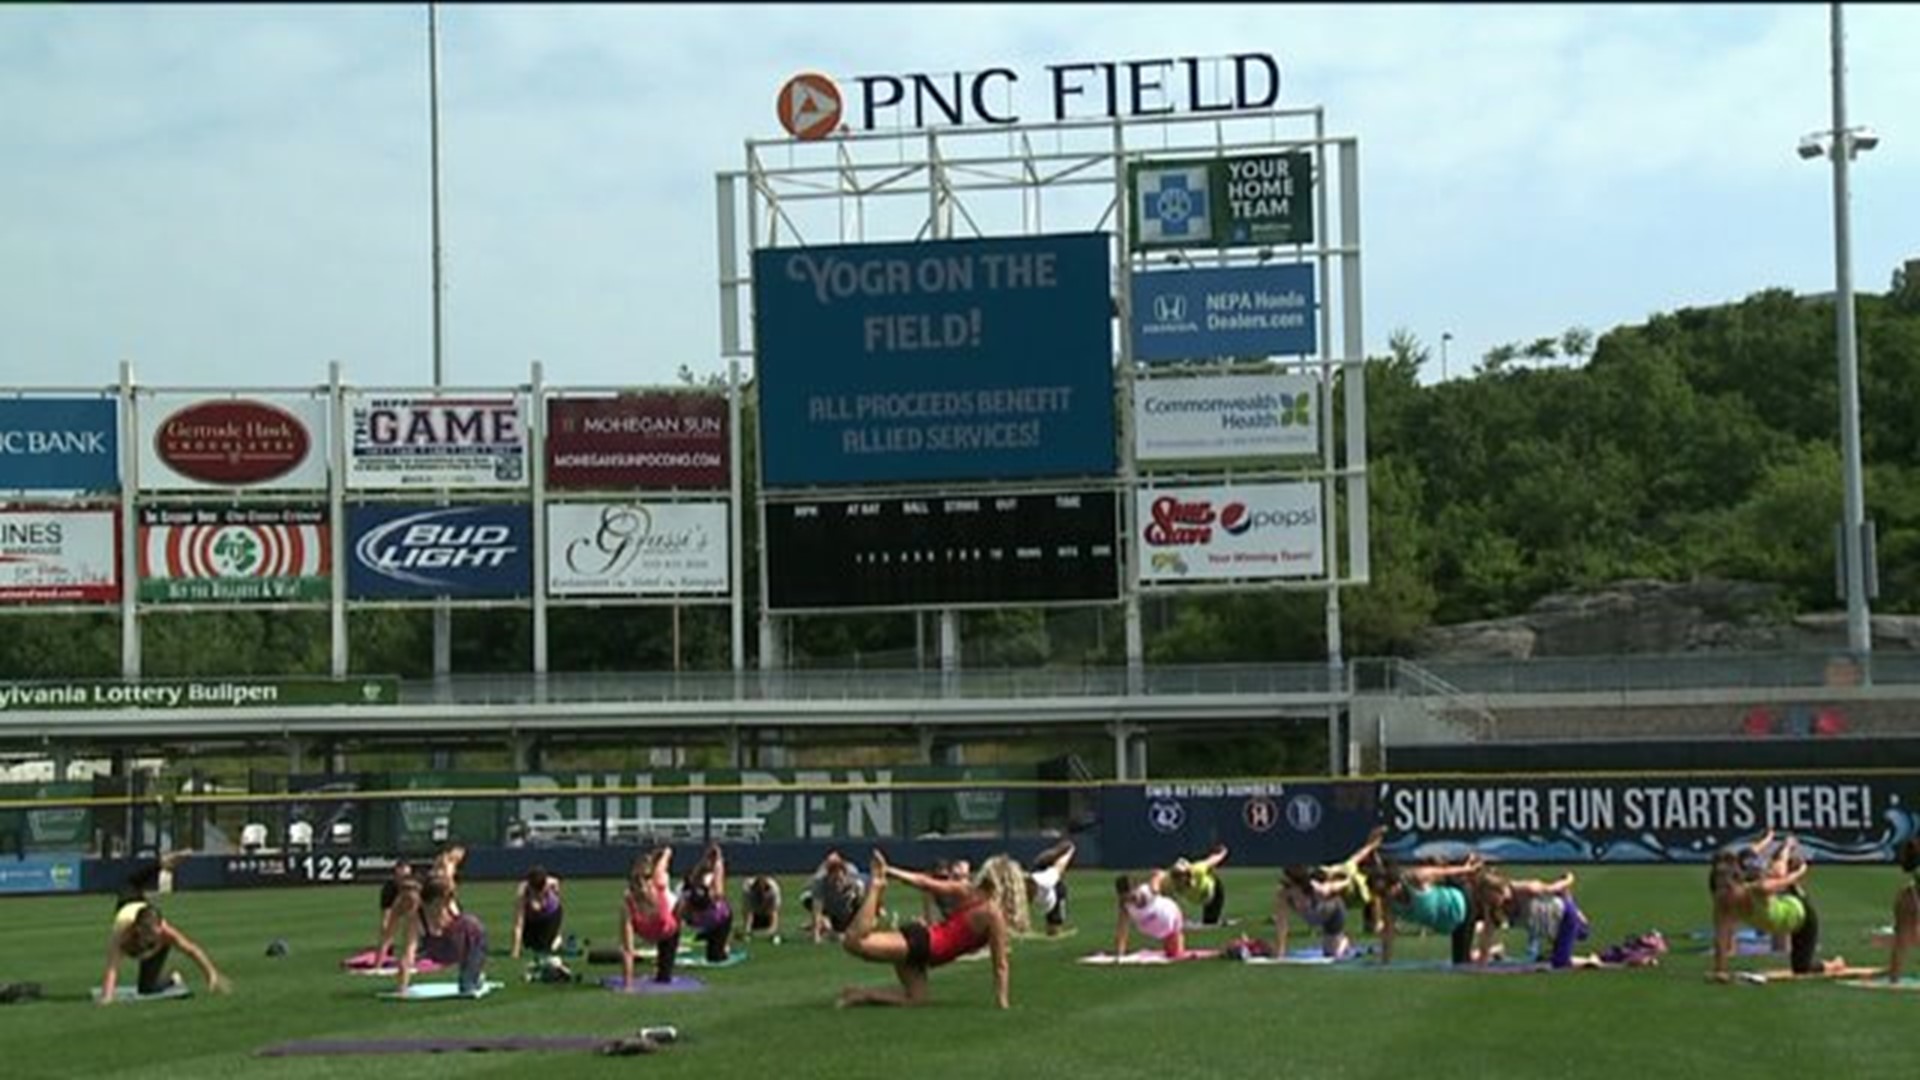 Taking it to the Diamond for some Yoga